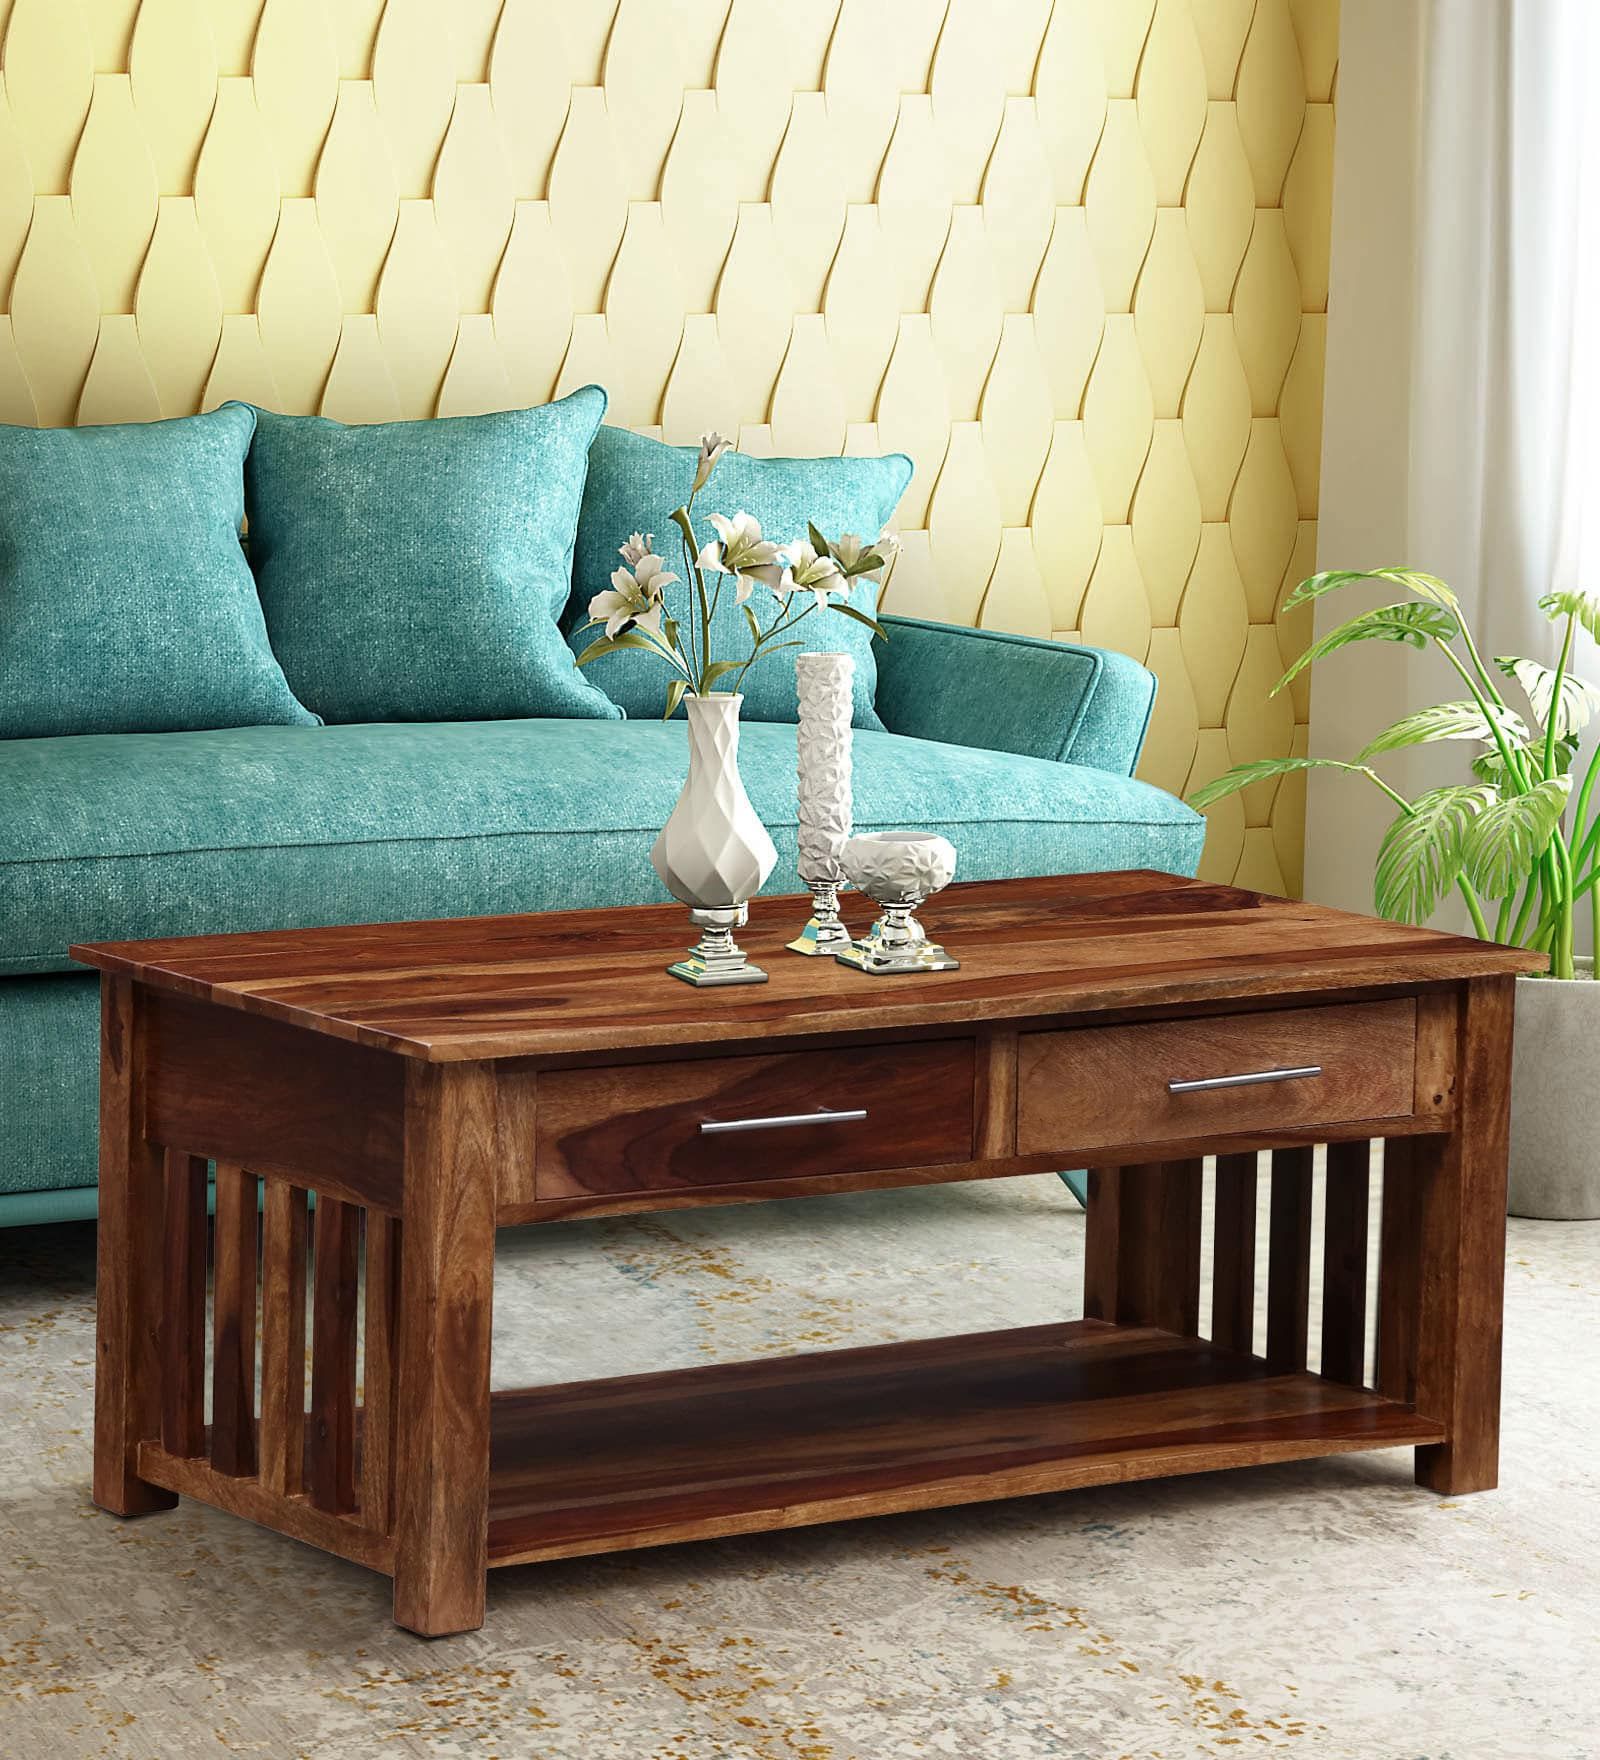 Large Sheesham Solid Wood Coffee Table In Rustic Teak Finishmft Within Coffee Tables With Solid Legs (Gallery 9 of 20)